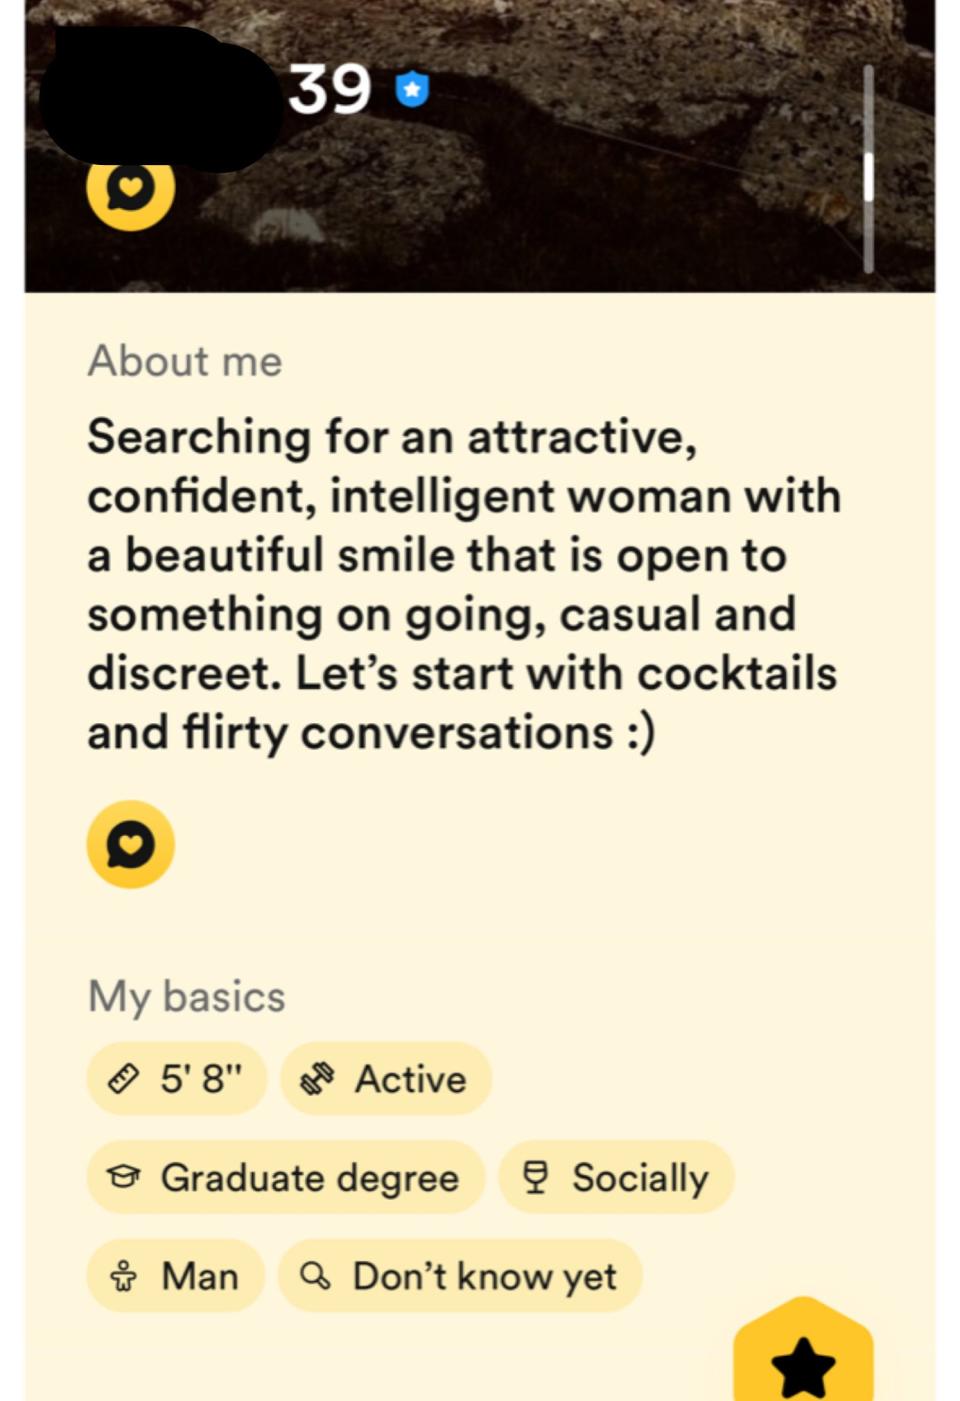 searching for an attractive confident woman with a beautiful smile that is open to something ongoing, casual and discreet. let's start with cocktails and flirty conversations